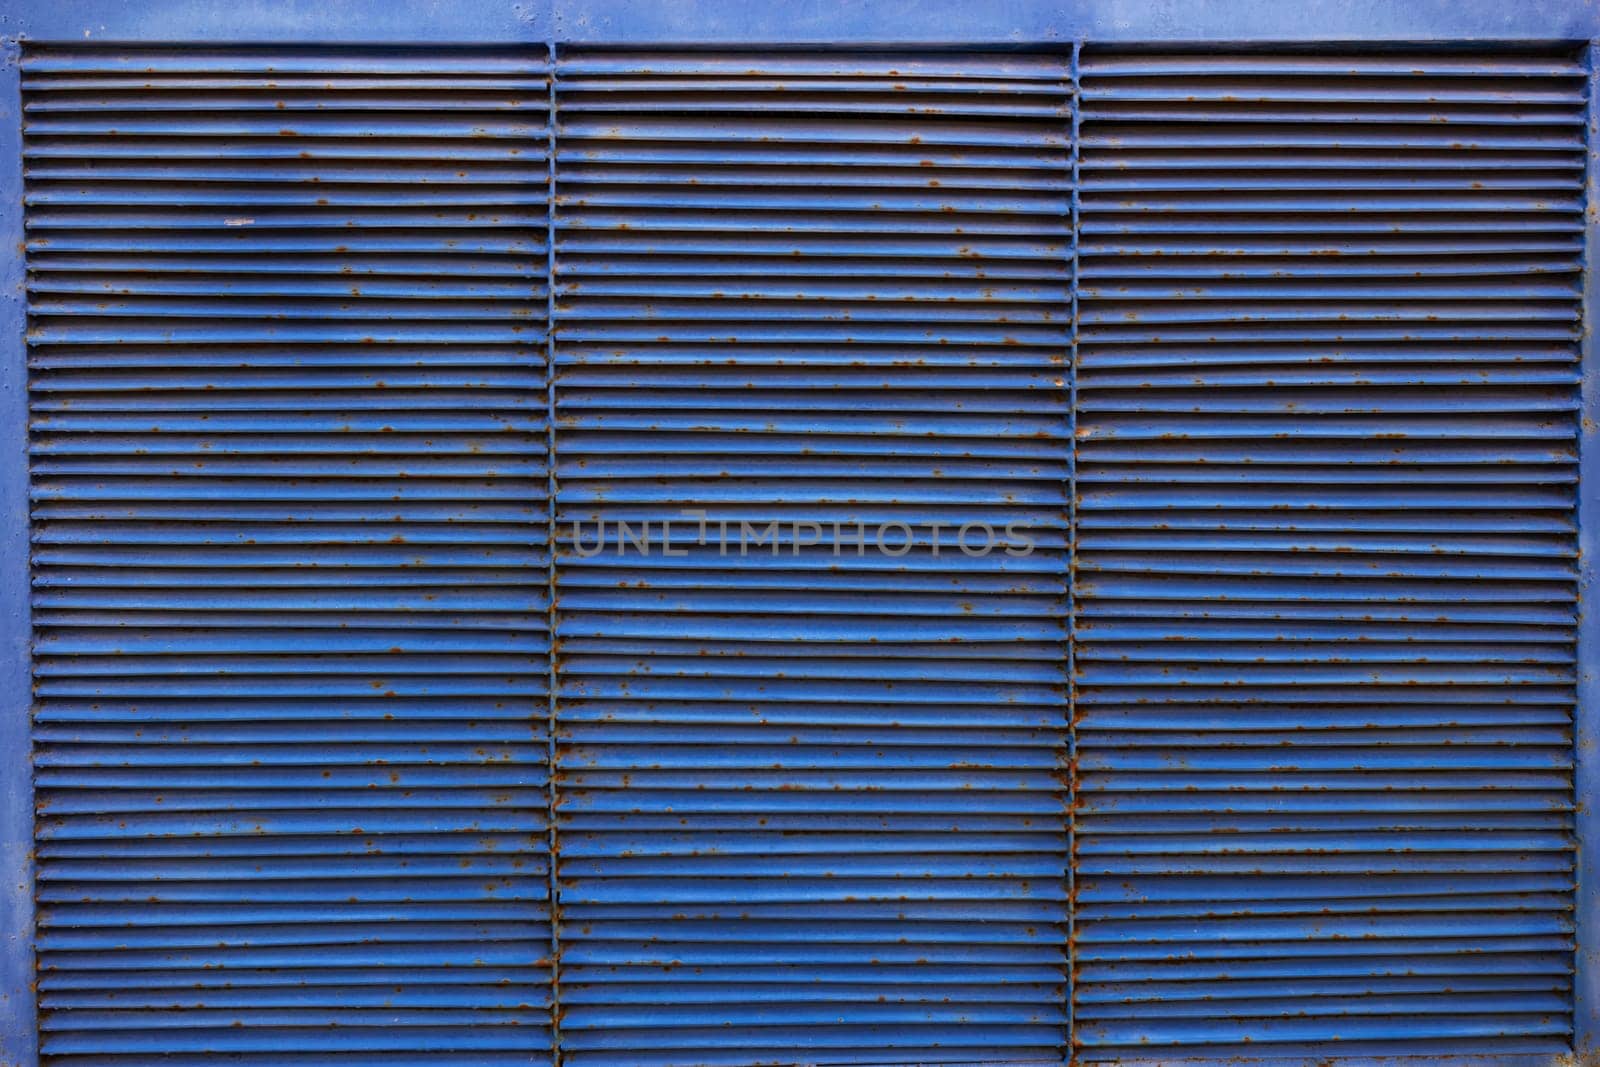 abstract background blue metal grille blinds stripes. by electrovenik